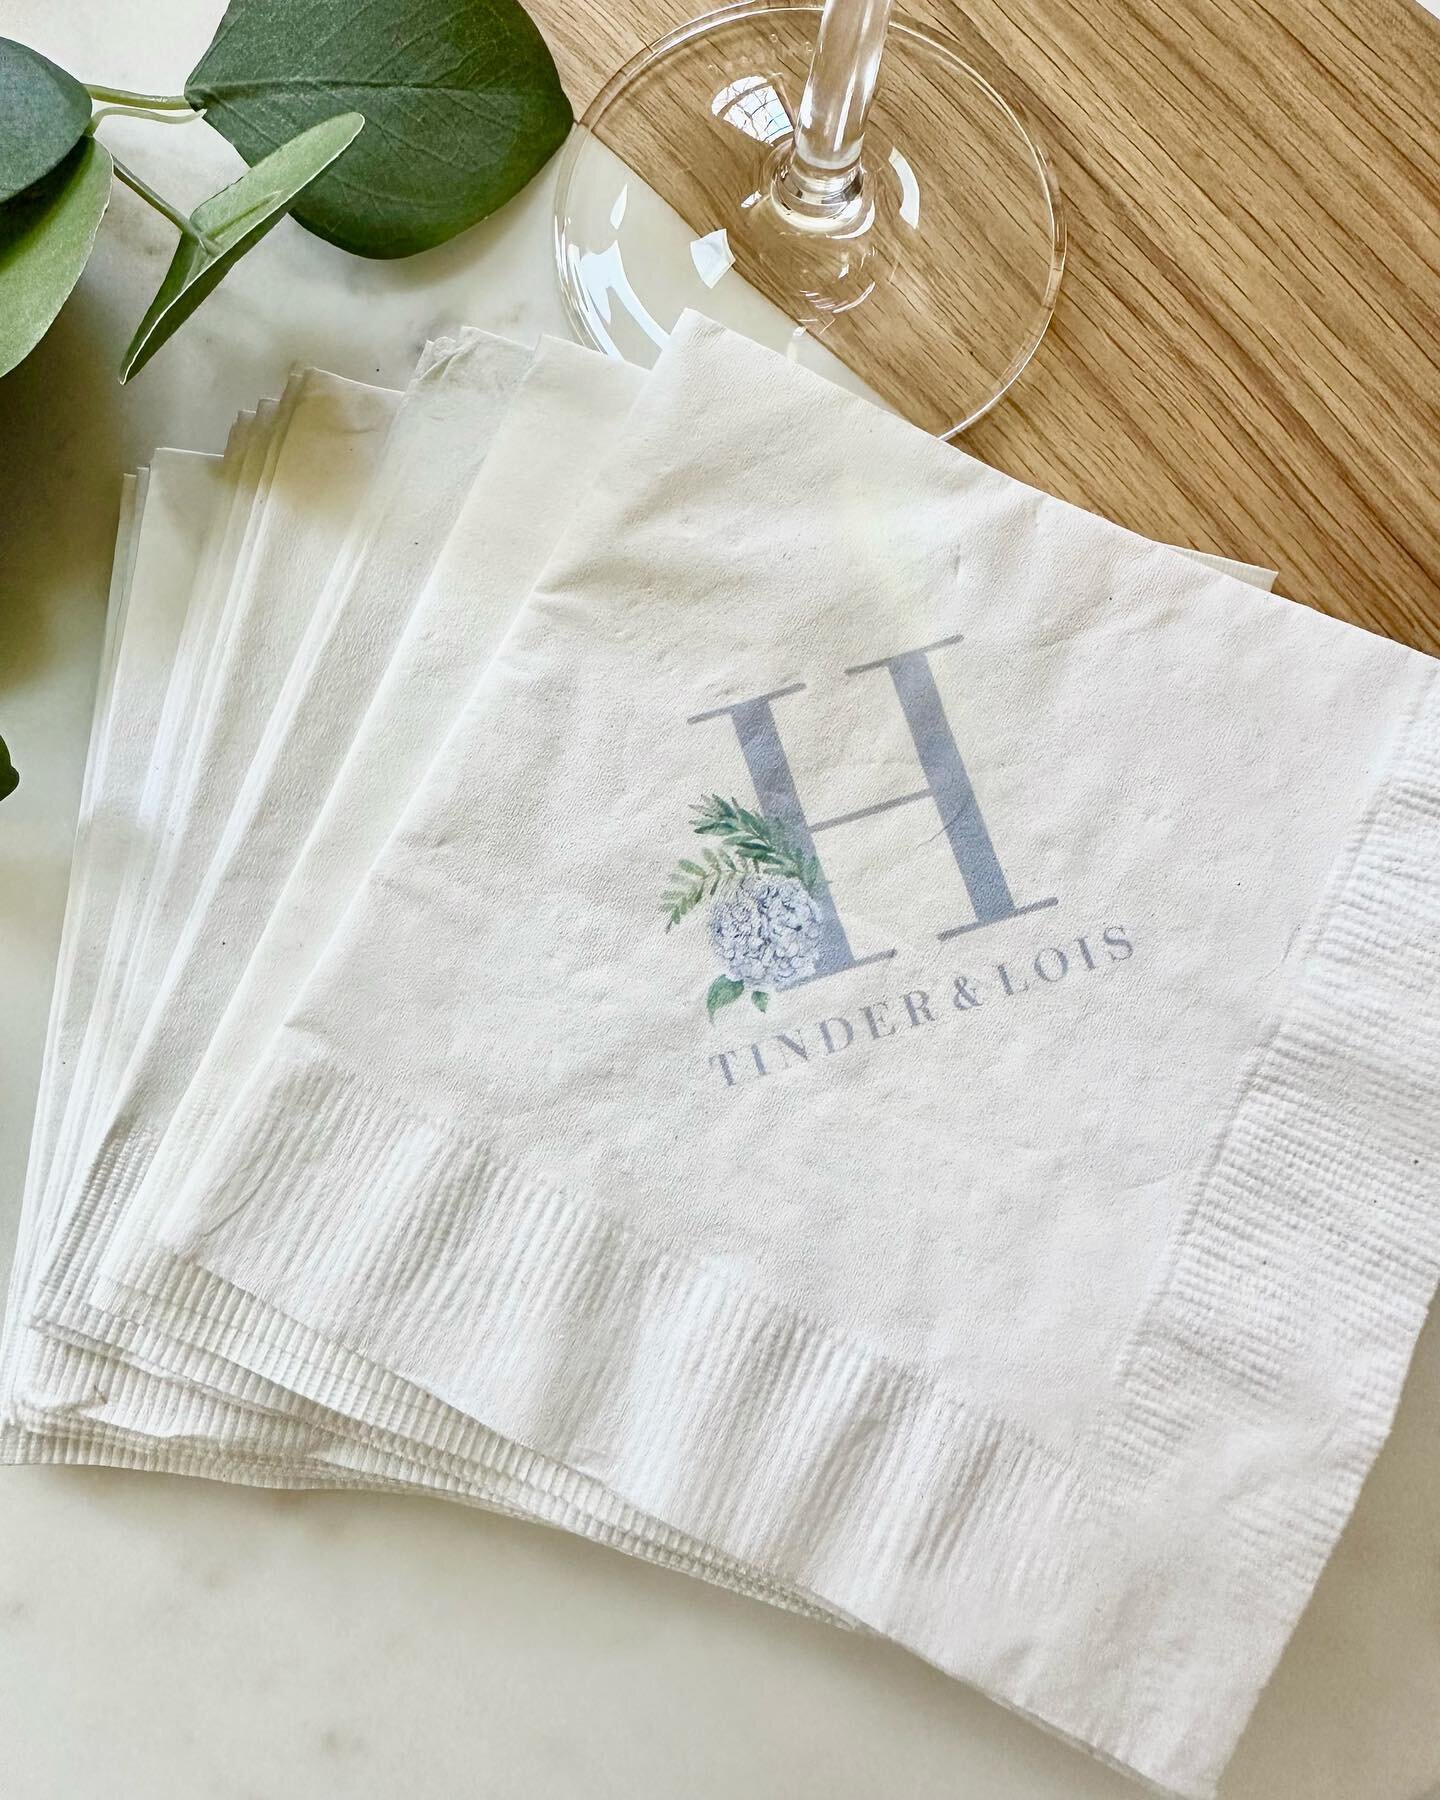 Our Bride asked if we could incorporate her favorite flower into her wedding logo and we said YES! Loving how these napkins turned out! 🤍
&bull;
&bull;
&bull;
&bull;
#wedding #weddingnapkins #customnapkins #bridetobe #bride #hydrangea #hydrangeas #w